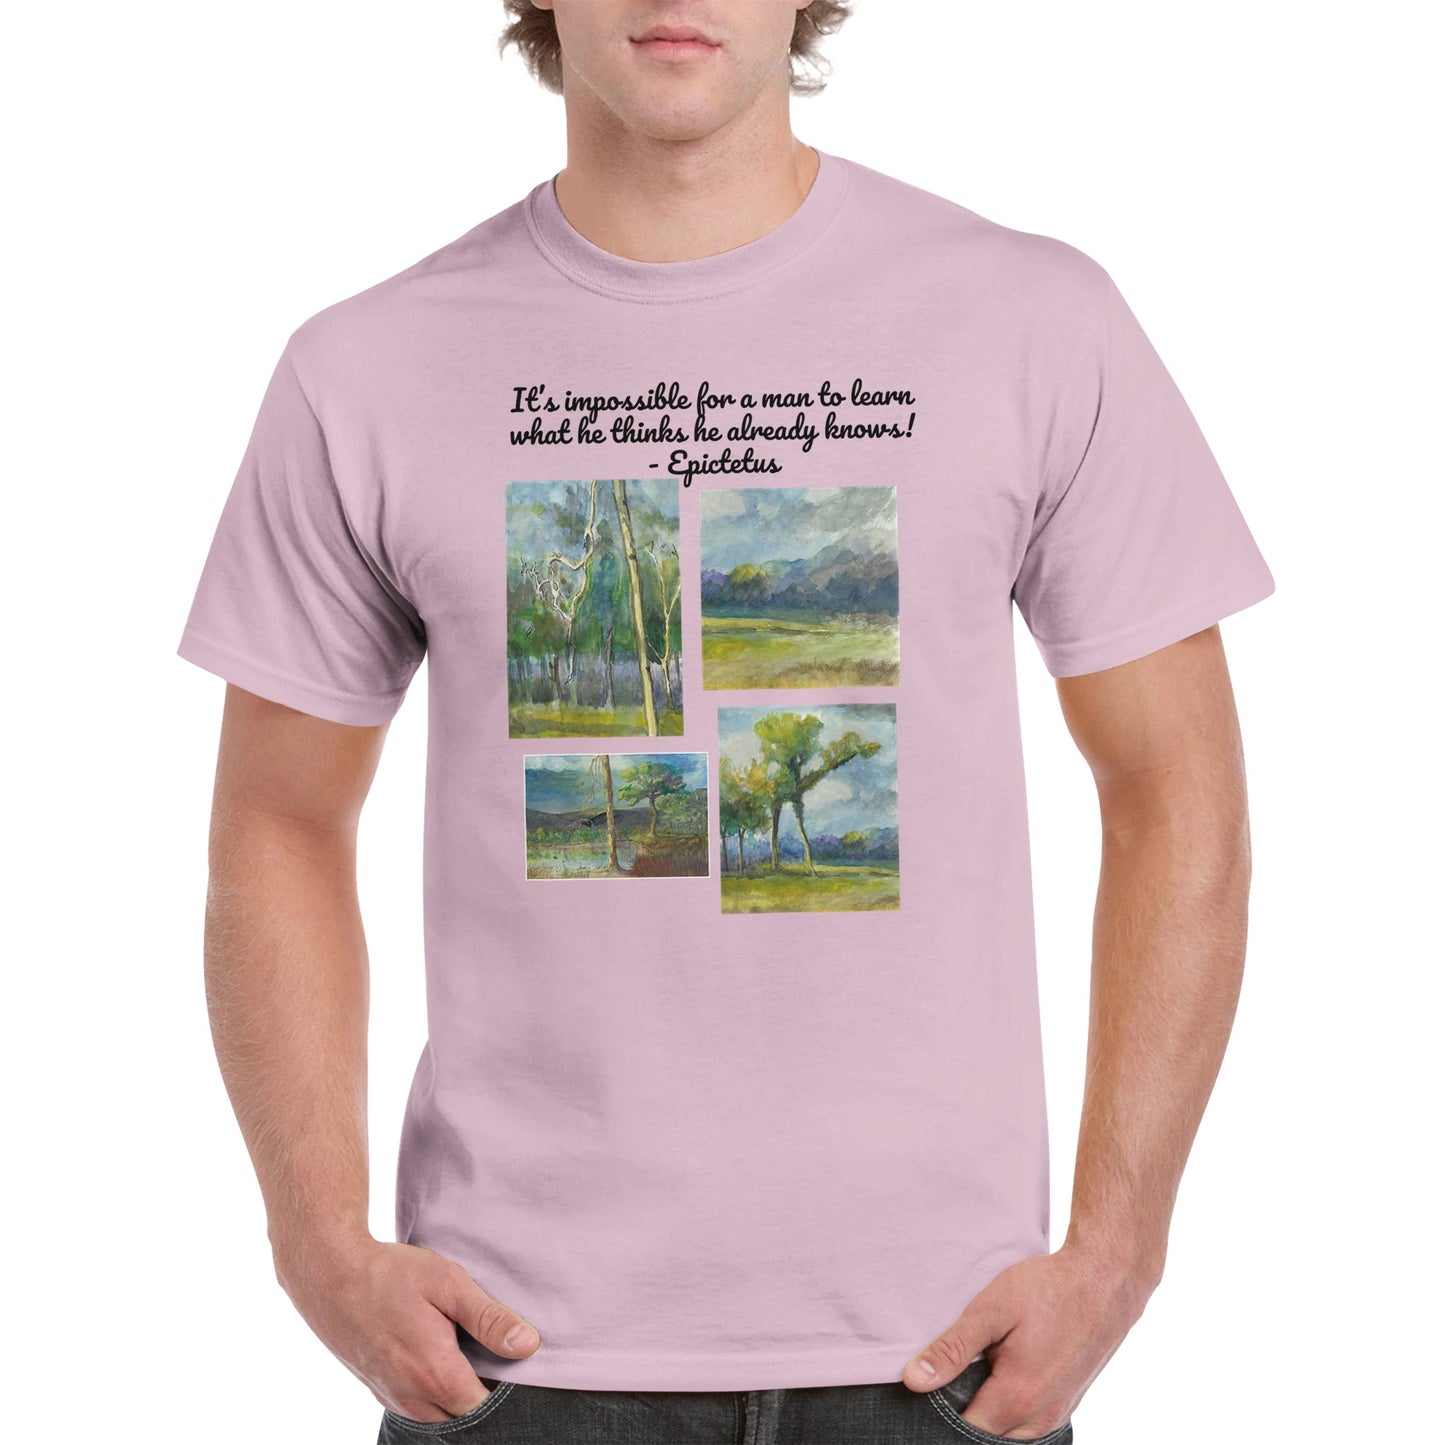 A light pink heavyweight Unisex Crewneck cotton t-shirt with original artwork It’s impossible for a man to learn what he thinks he already knows! on the front from WhatYa Say Apparel worn by blonde-haired male front view.